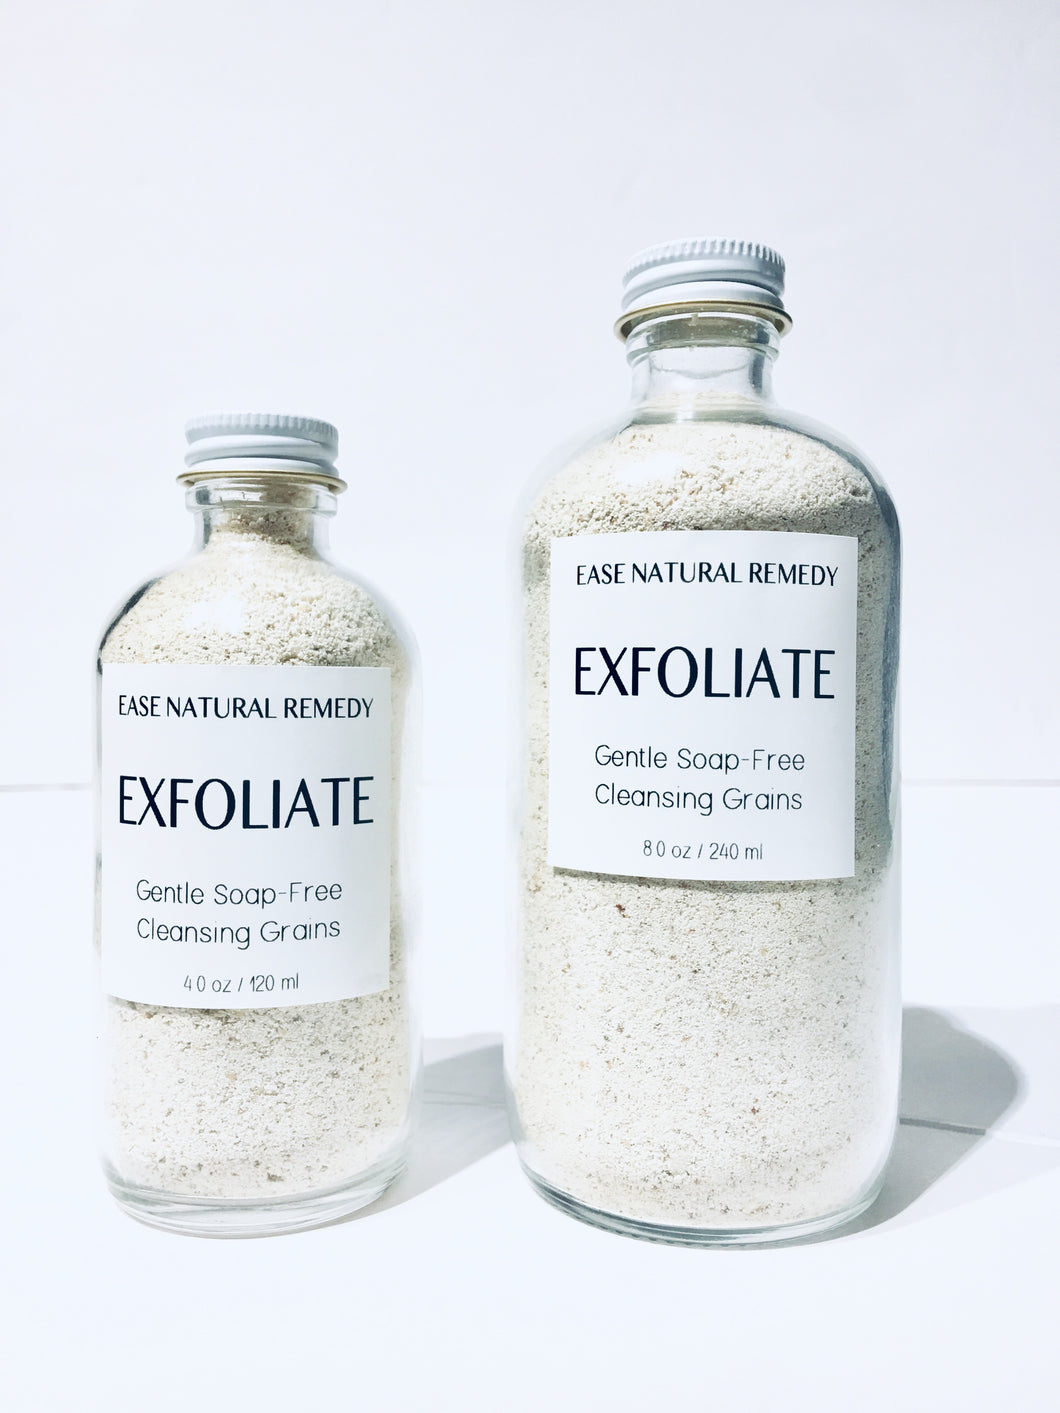 EXFOLIATE - Gentle Soap-Free Cleansing Grains (Almond + Oatmeal powder + Clay)